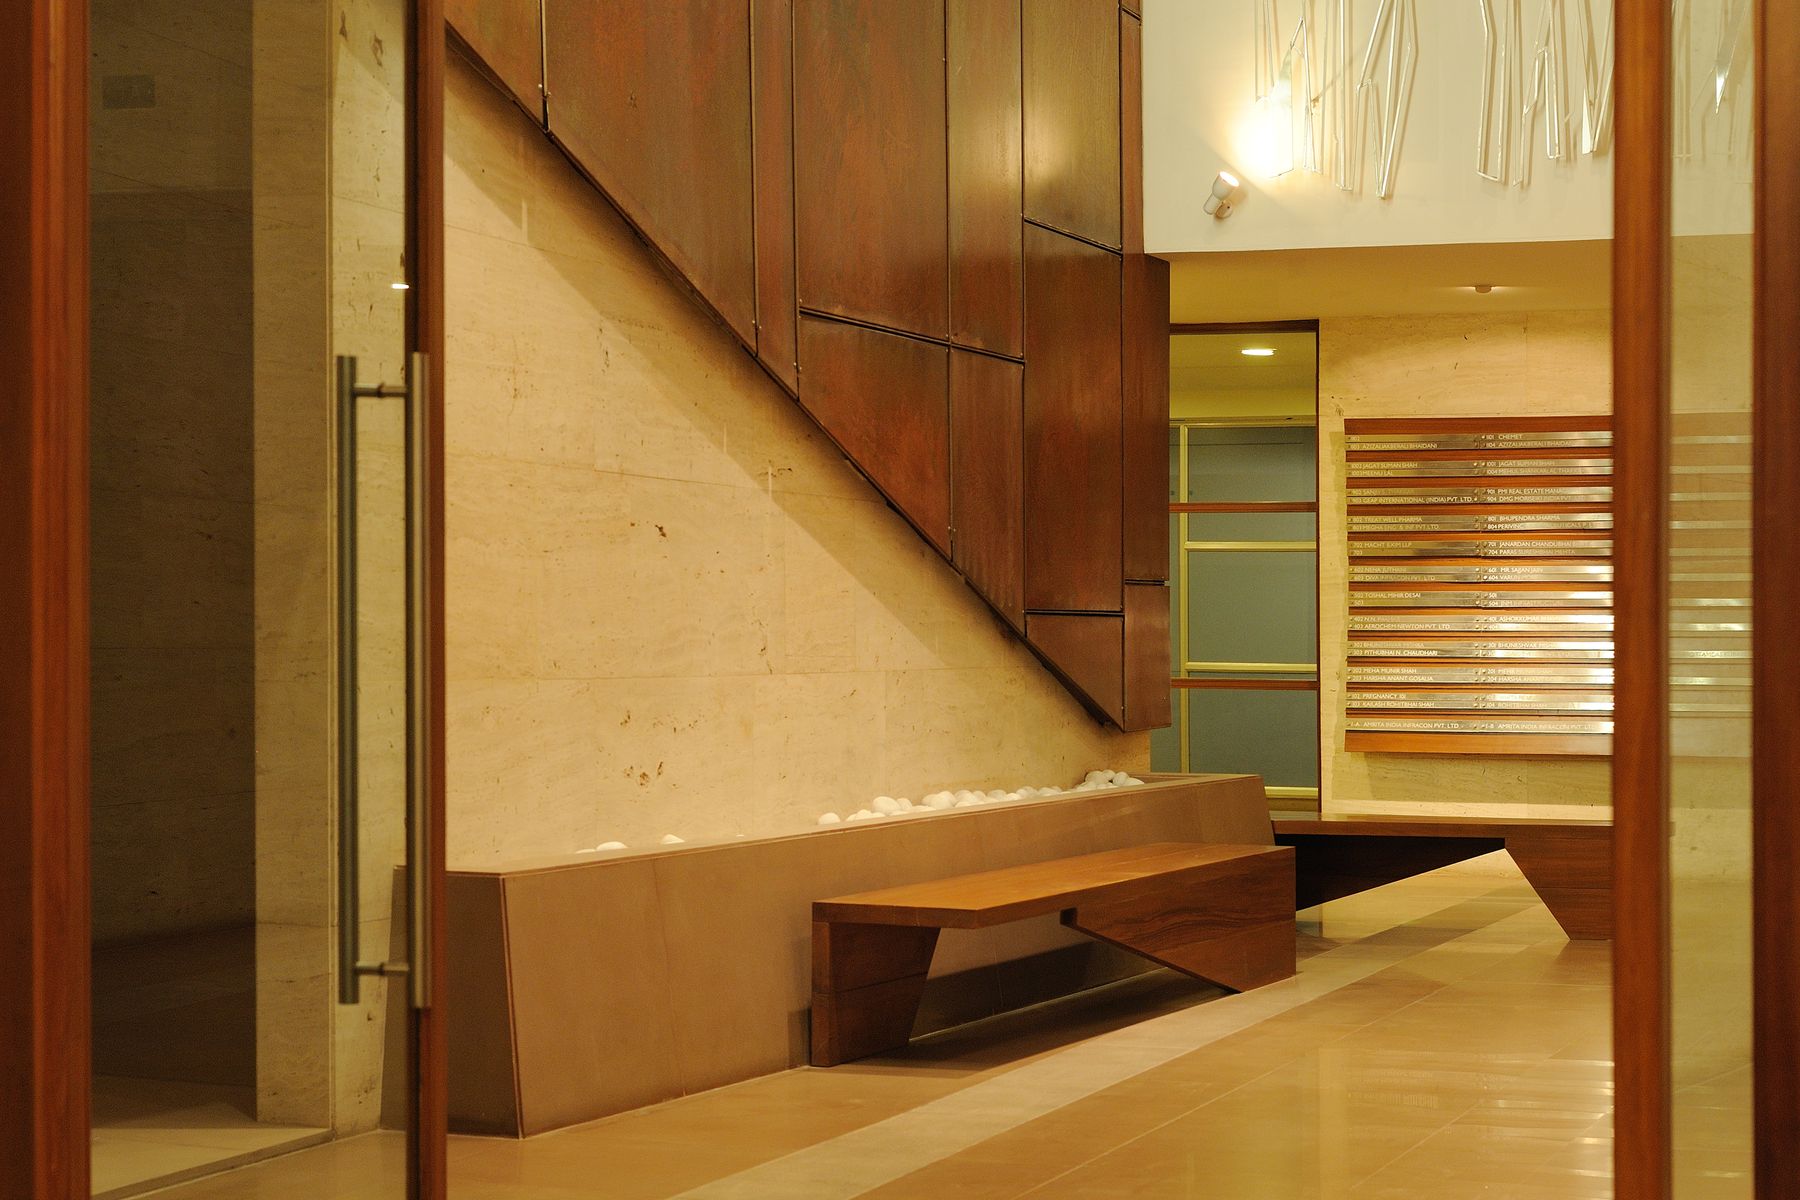 office foyer design, interior design, travertine cladding, metal shavings, wooden furniture, Indian architects, rusted steel